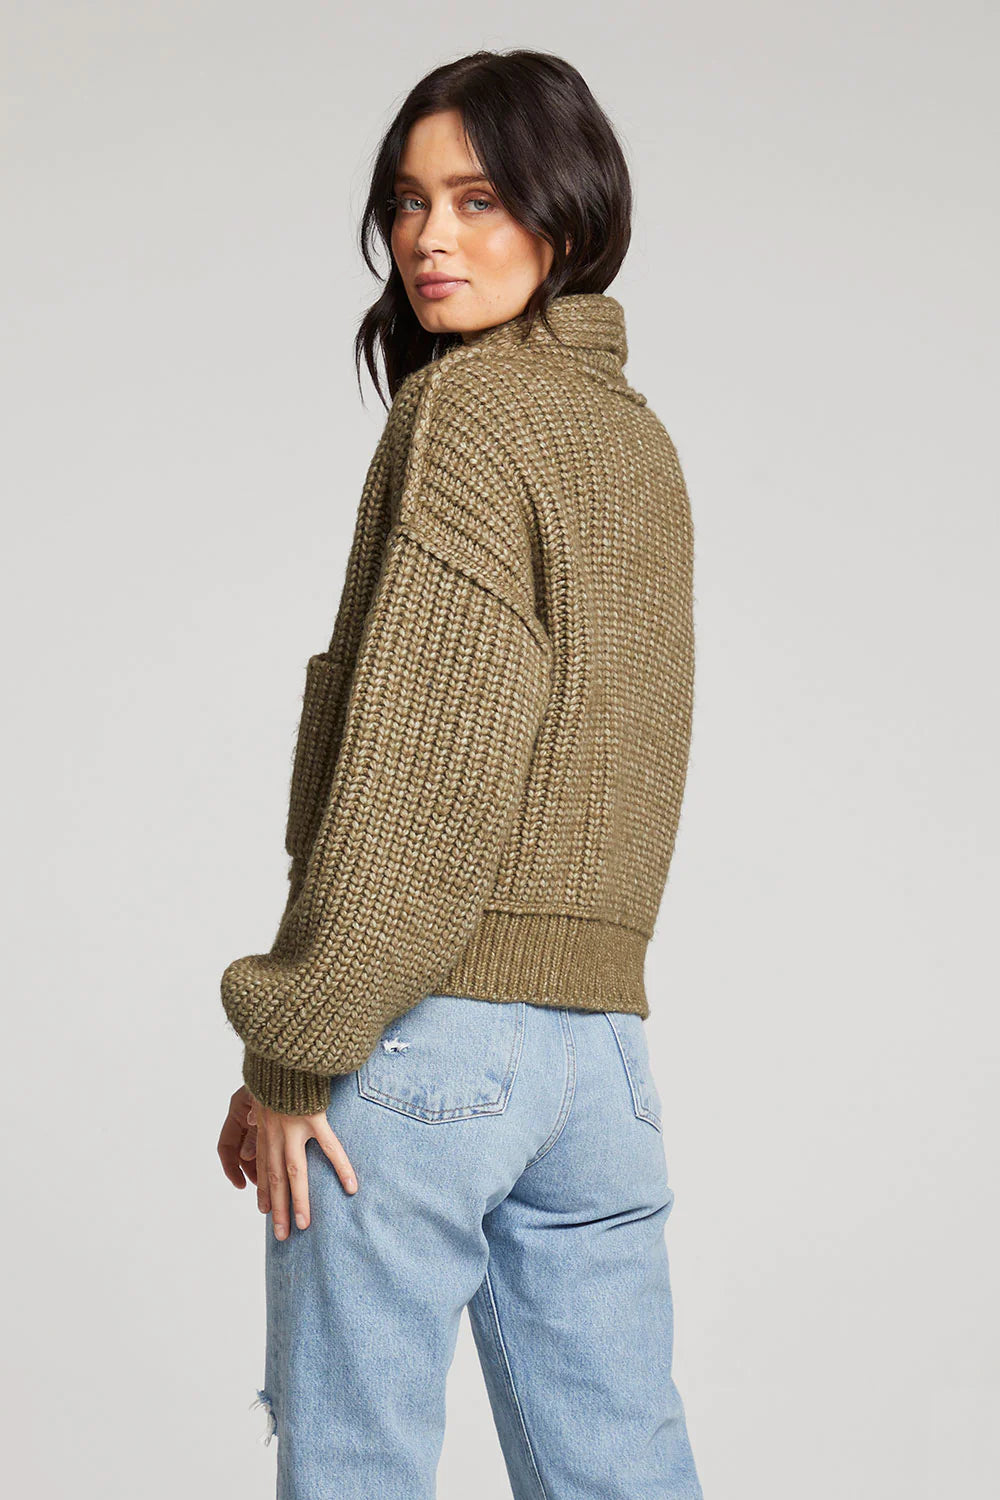 Saltwater Luxe Cain Sweater - Olive